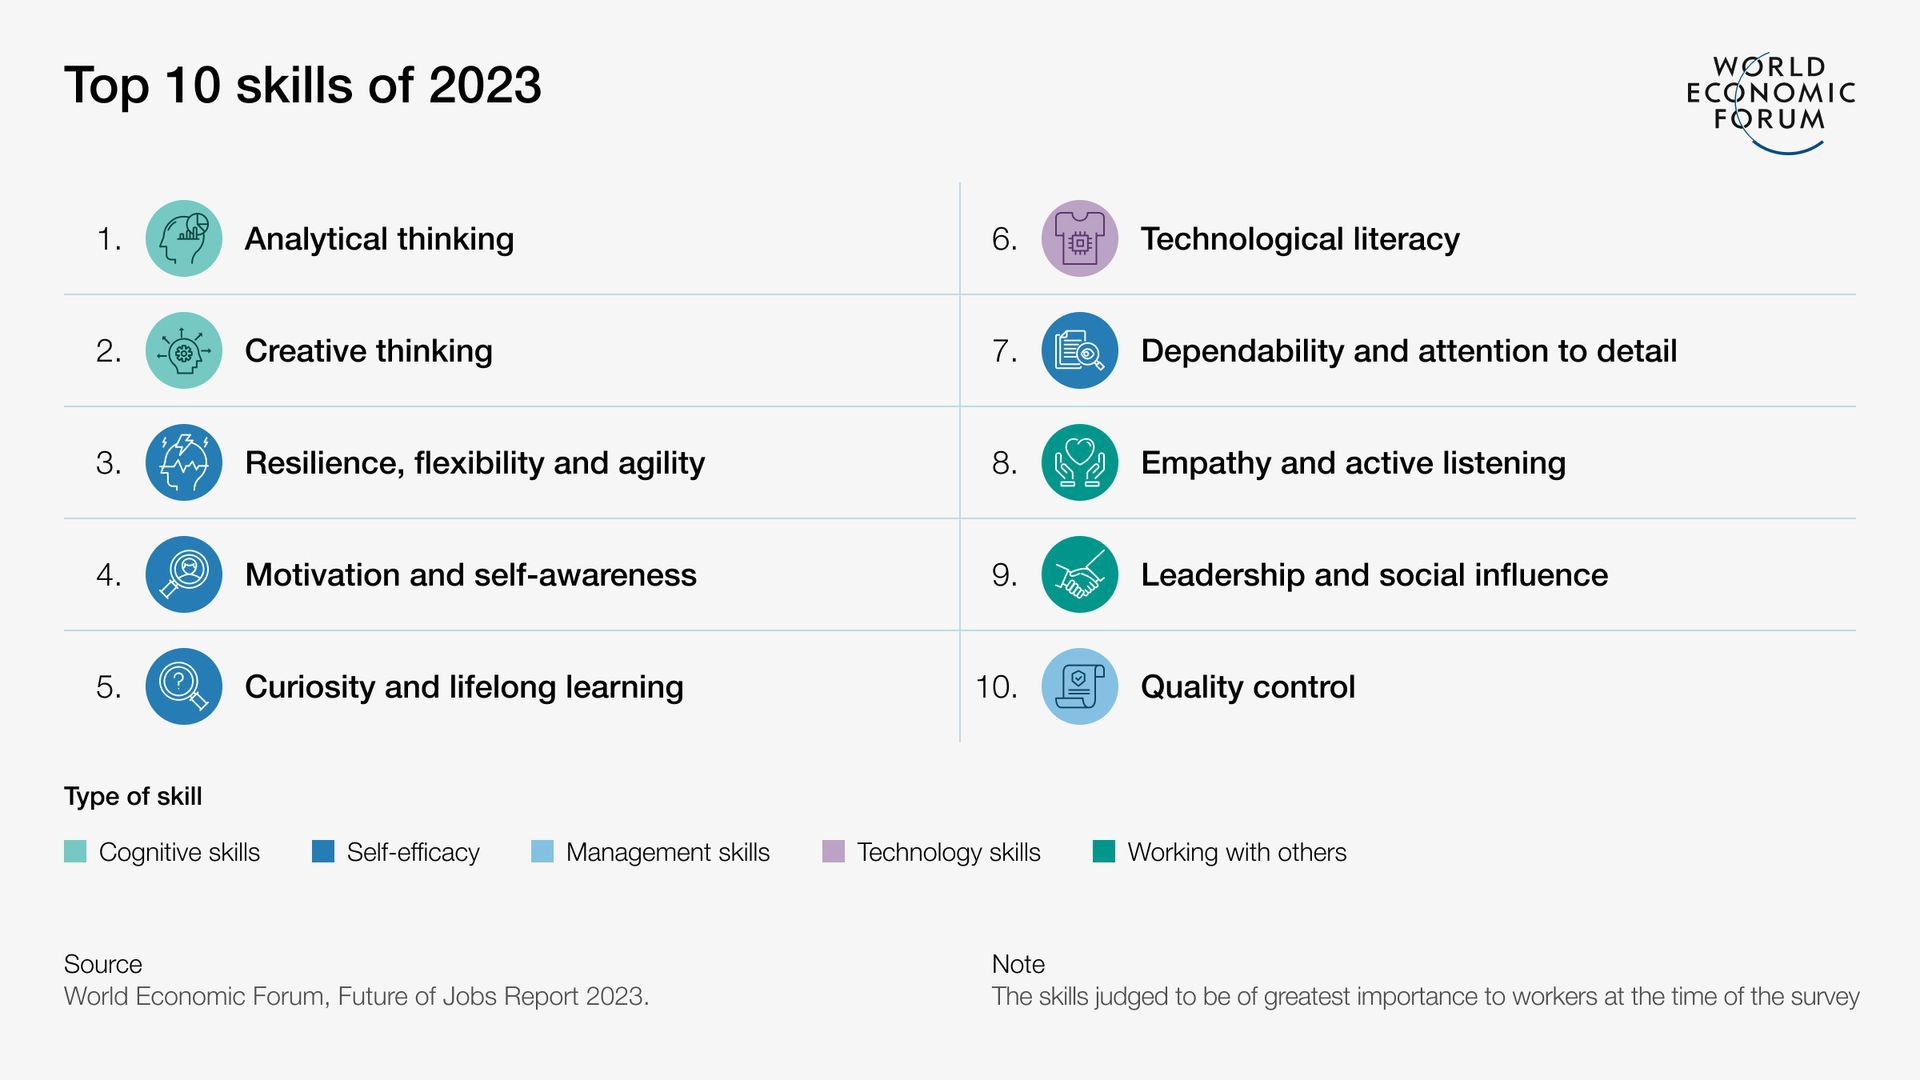 The World Economic Forum's top 10 skills of 2023 - the top two are 1. analytical thinking and 2. creative thinking.